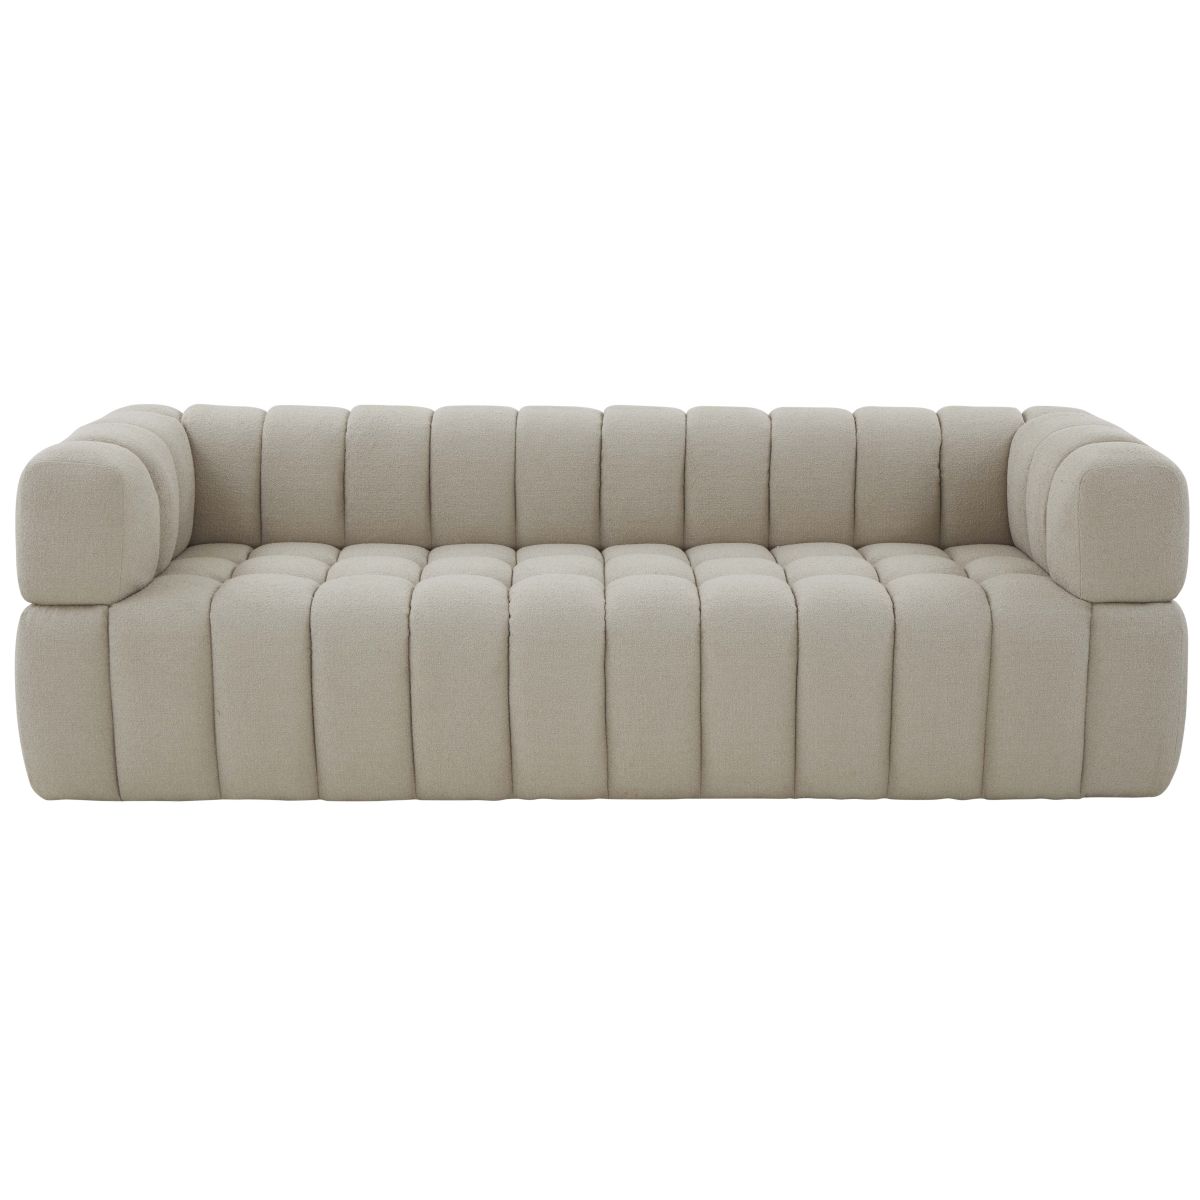 Safavieh Couture Calyna Channel Tufted Boucle Sofa - Light Grey